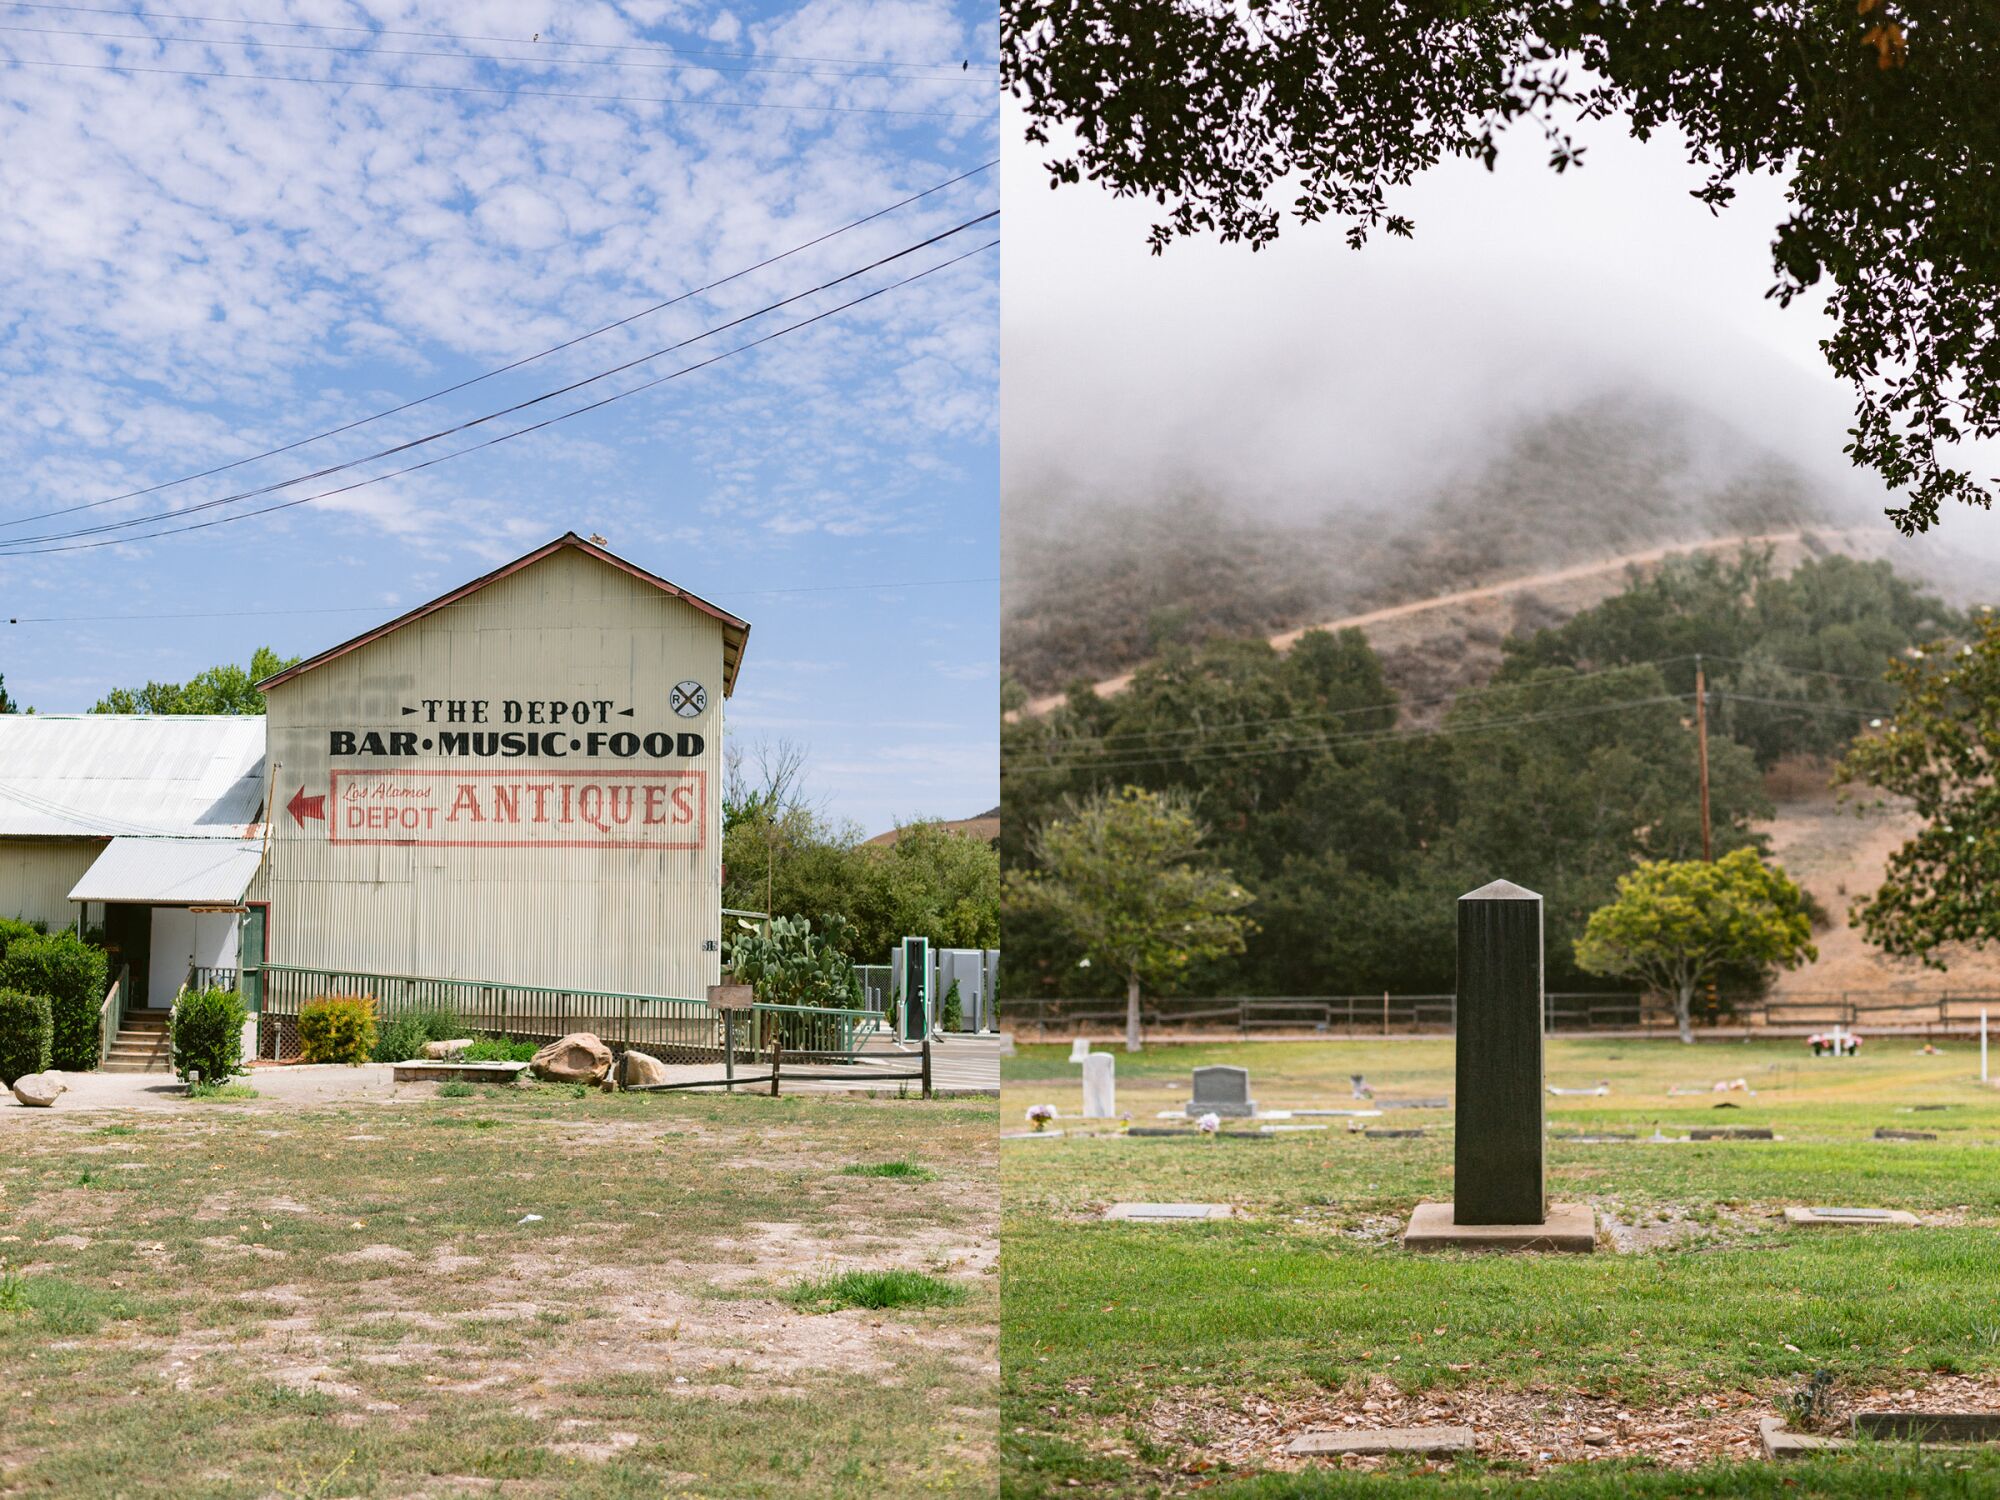 Two photos side by side of a large building labeled "The Depot", left, and a headstone in a quiet cemetery, right.